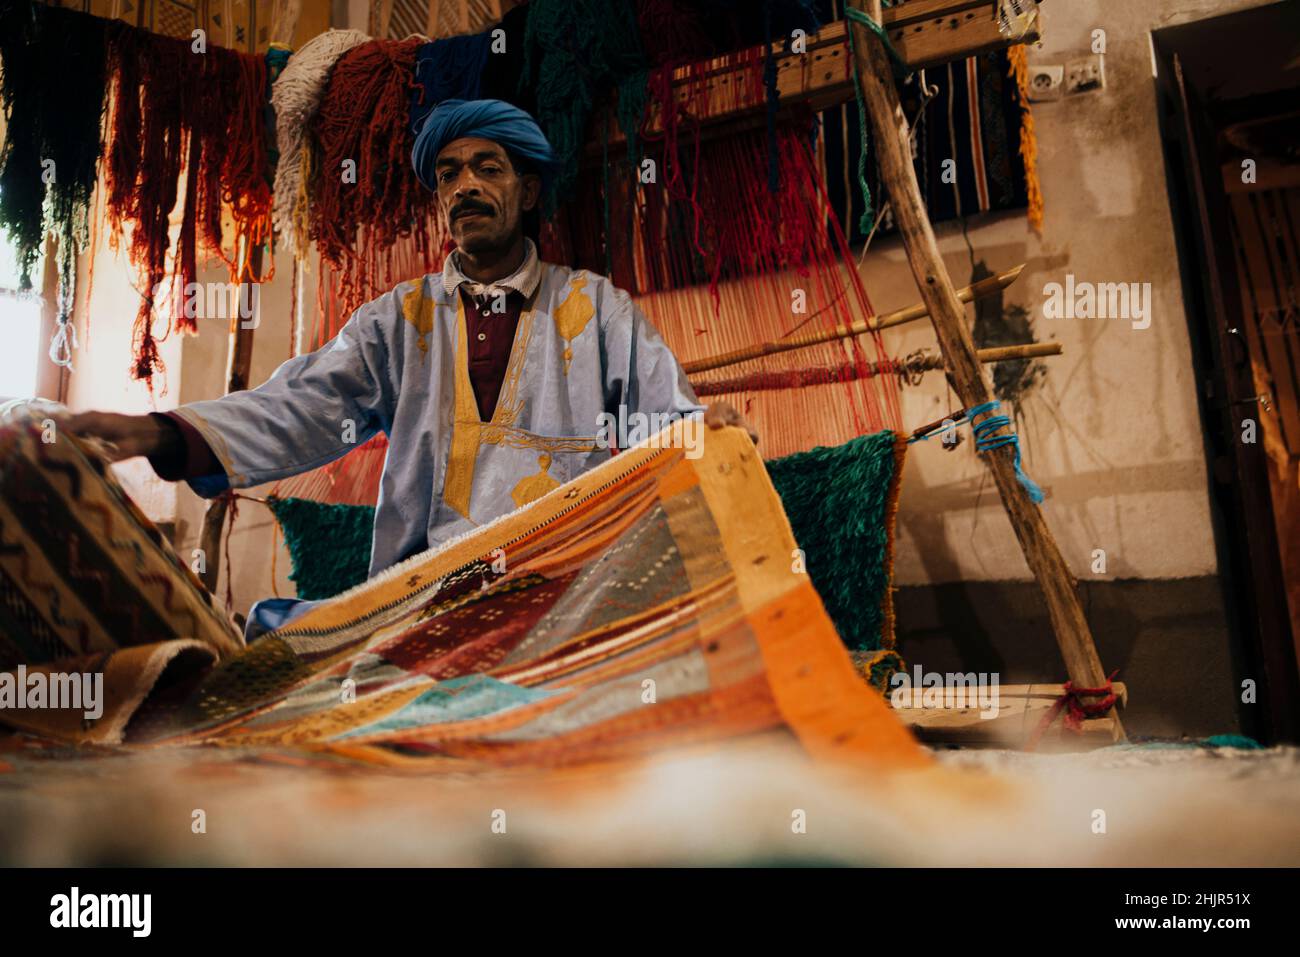 Front view of an Arab vendor of handmade carpets. Stock Photo